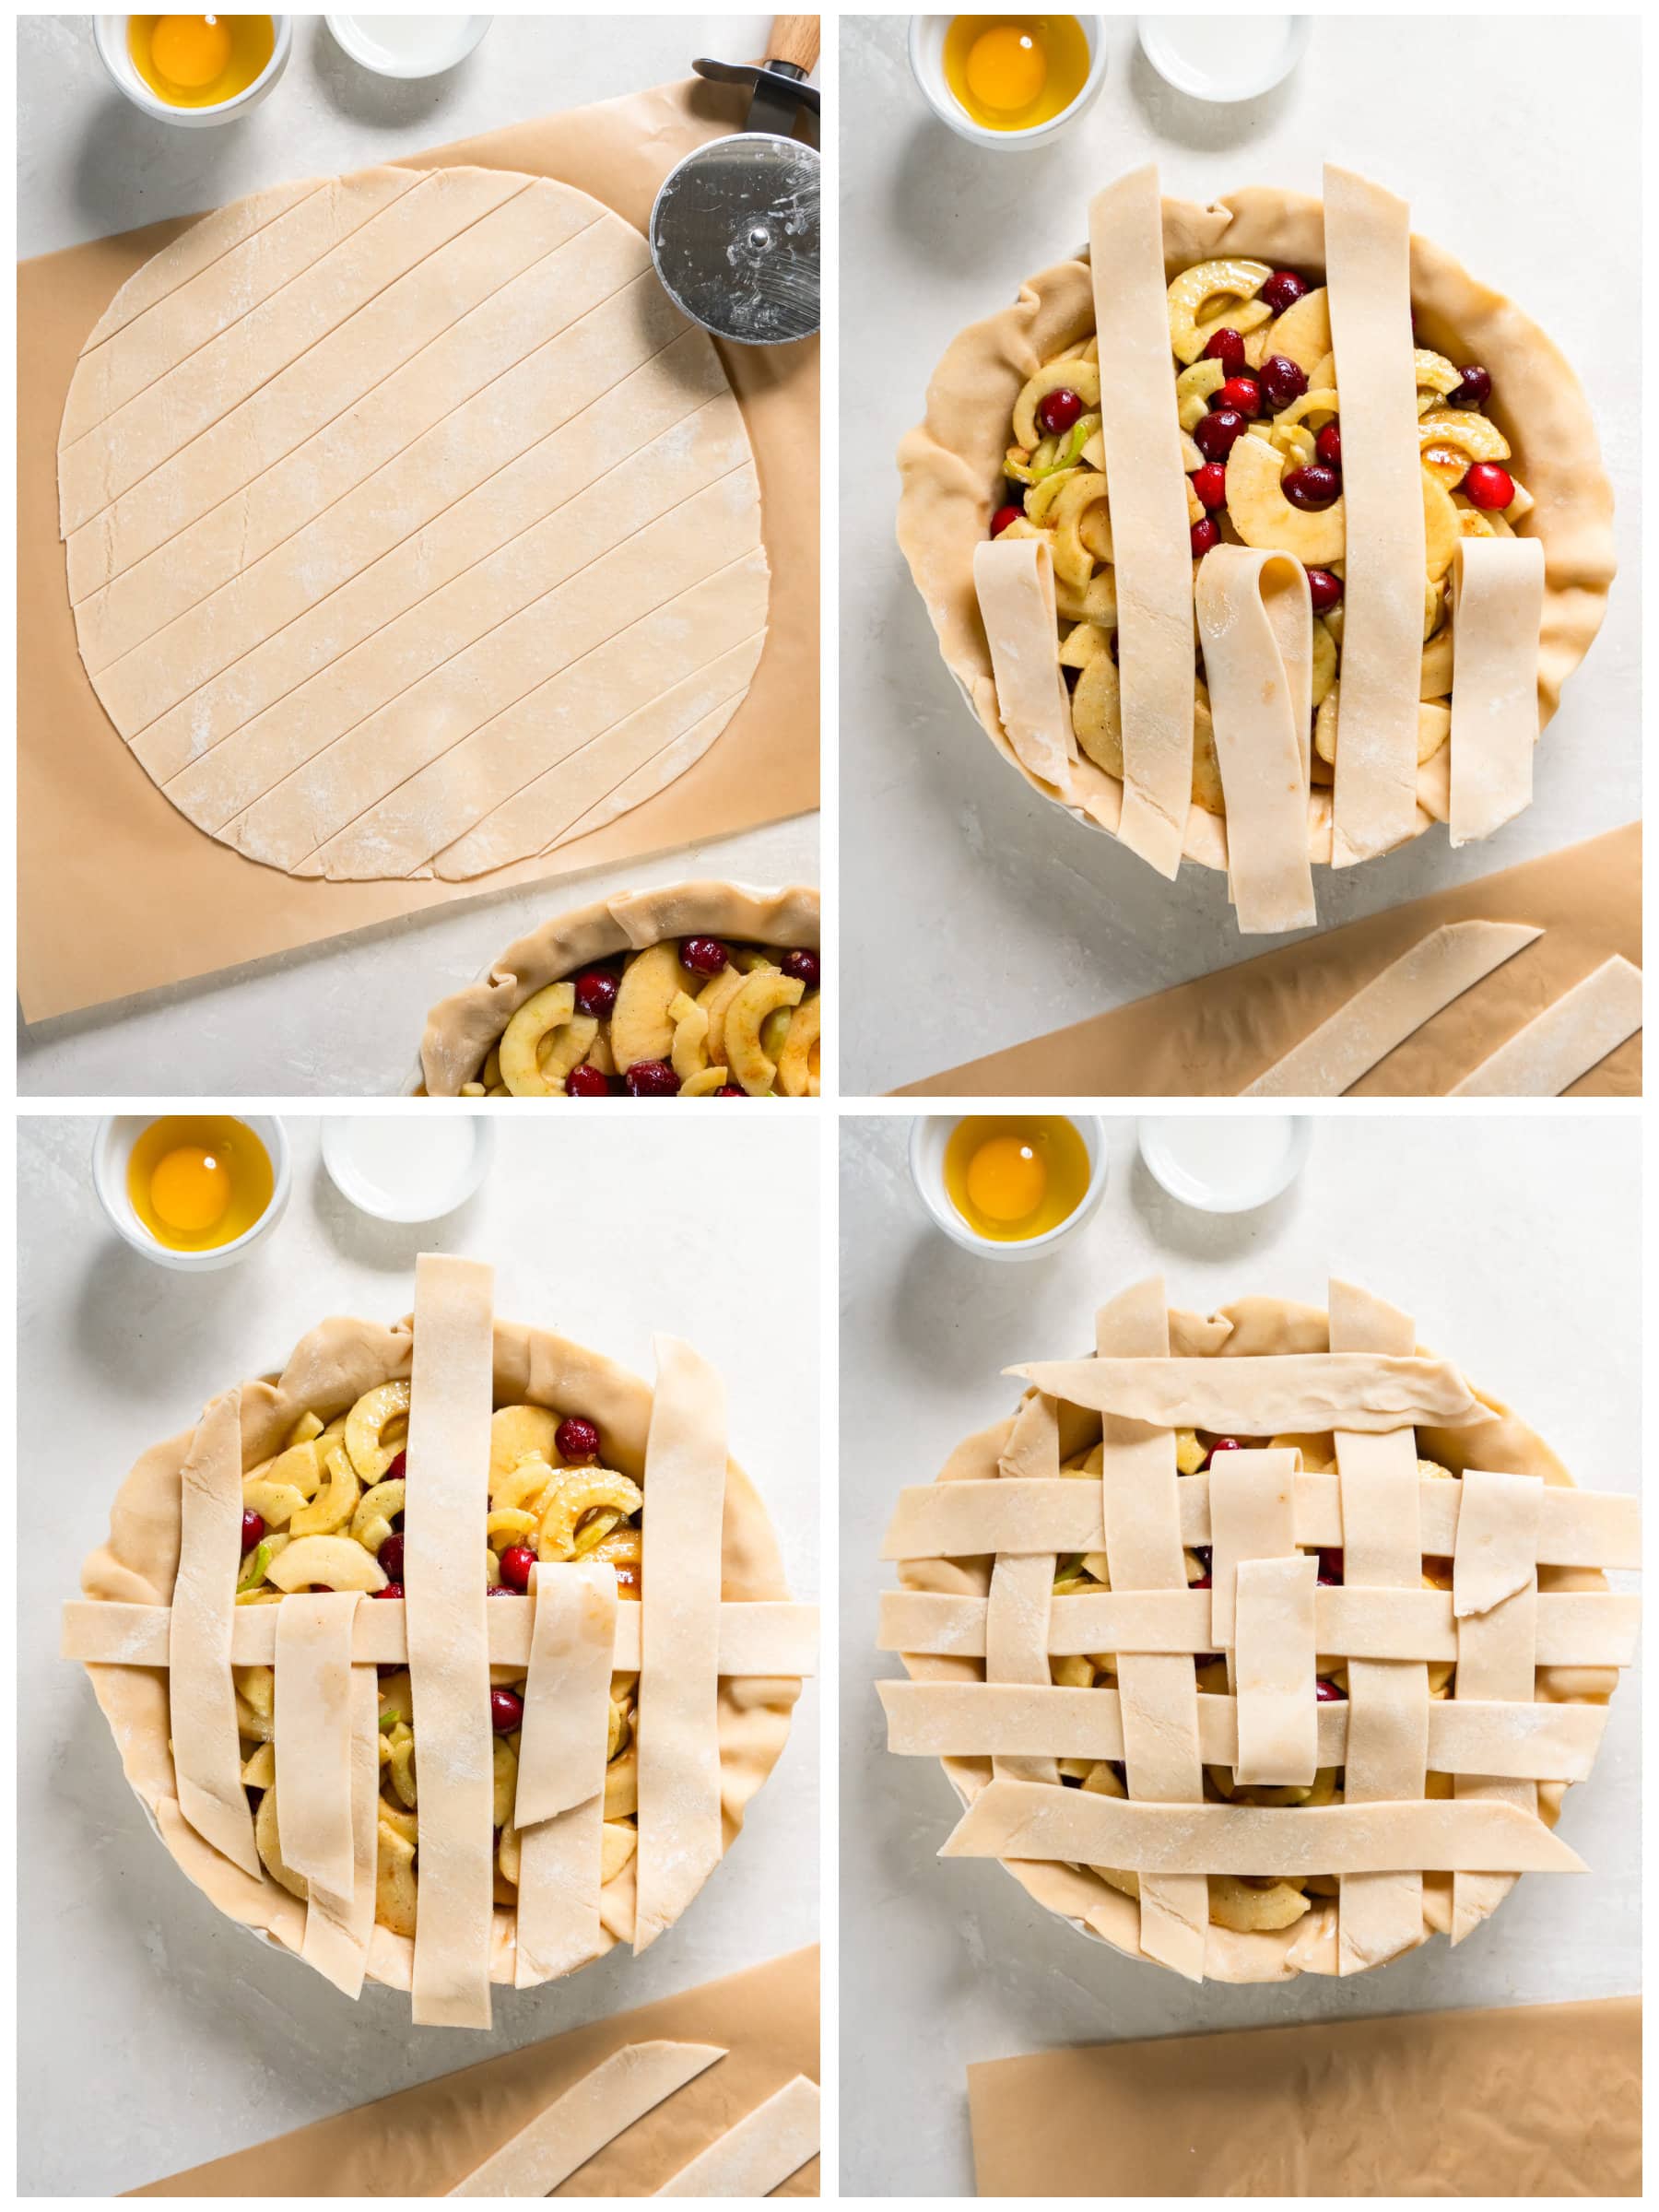 photo collage demonstrating how to make a lattice pie top.